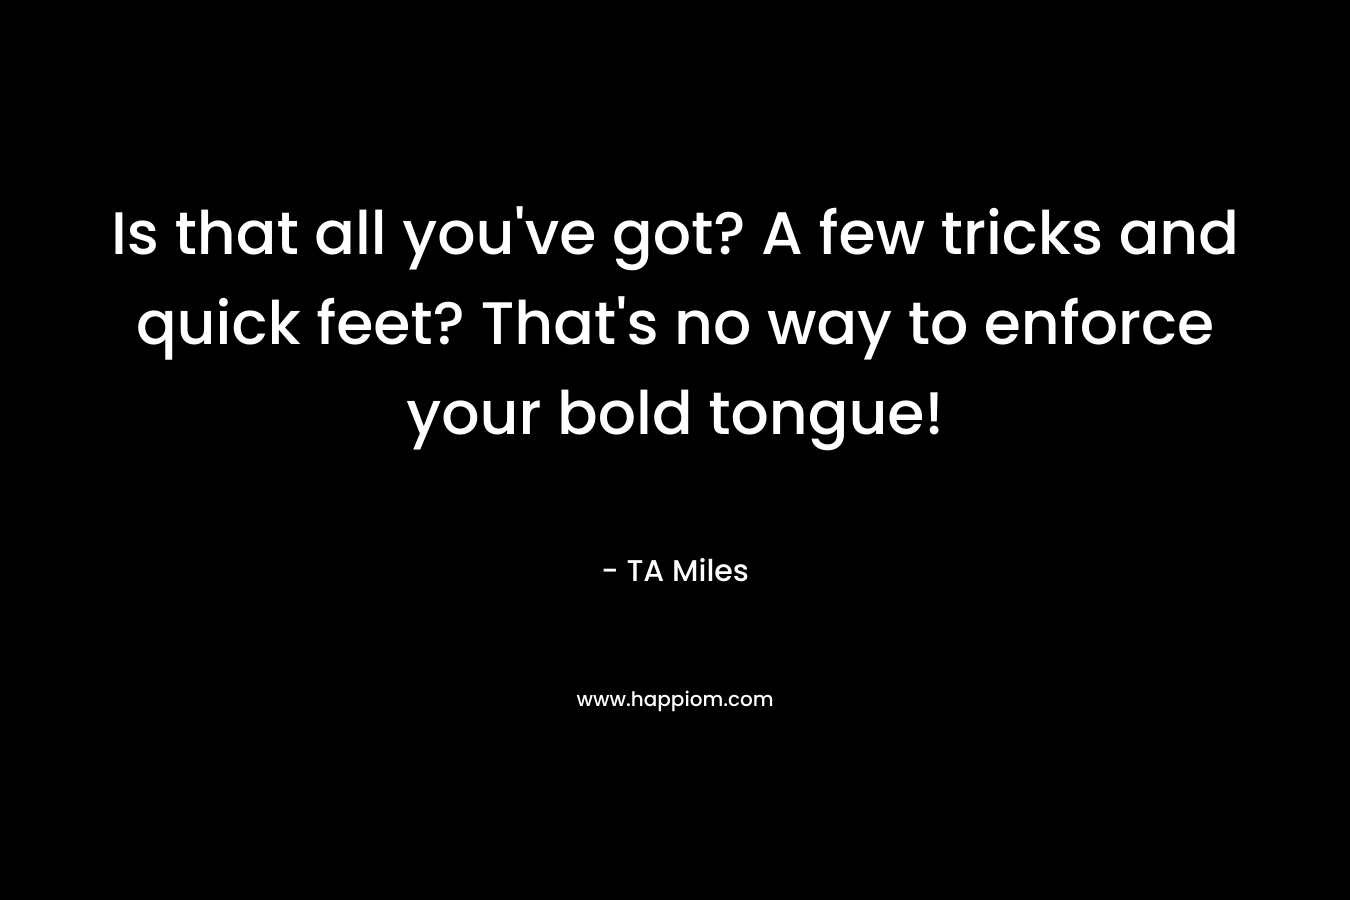 Is that all you’ve got? A few tricks and quick feet? That’s no way to enforce your bold tongue! – TA Miles